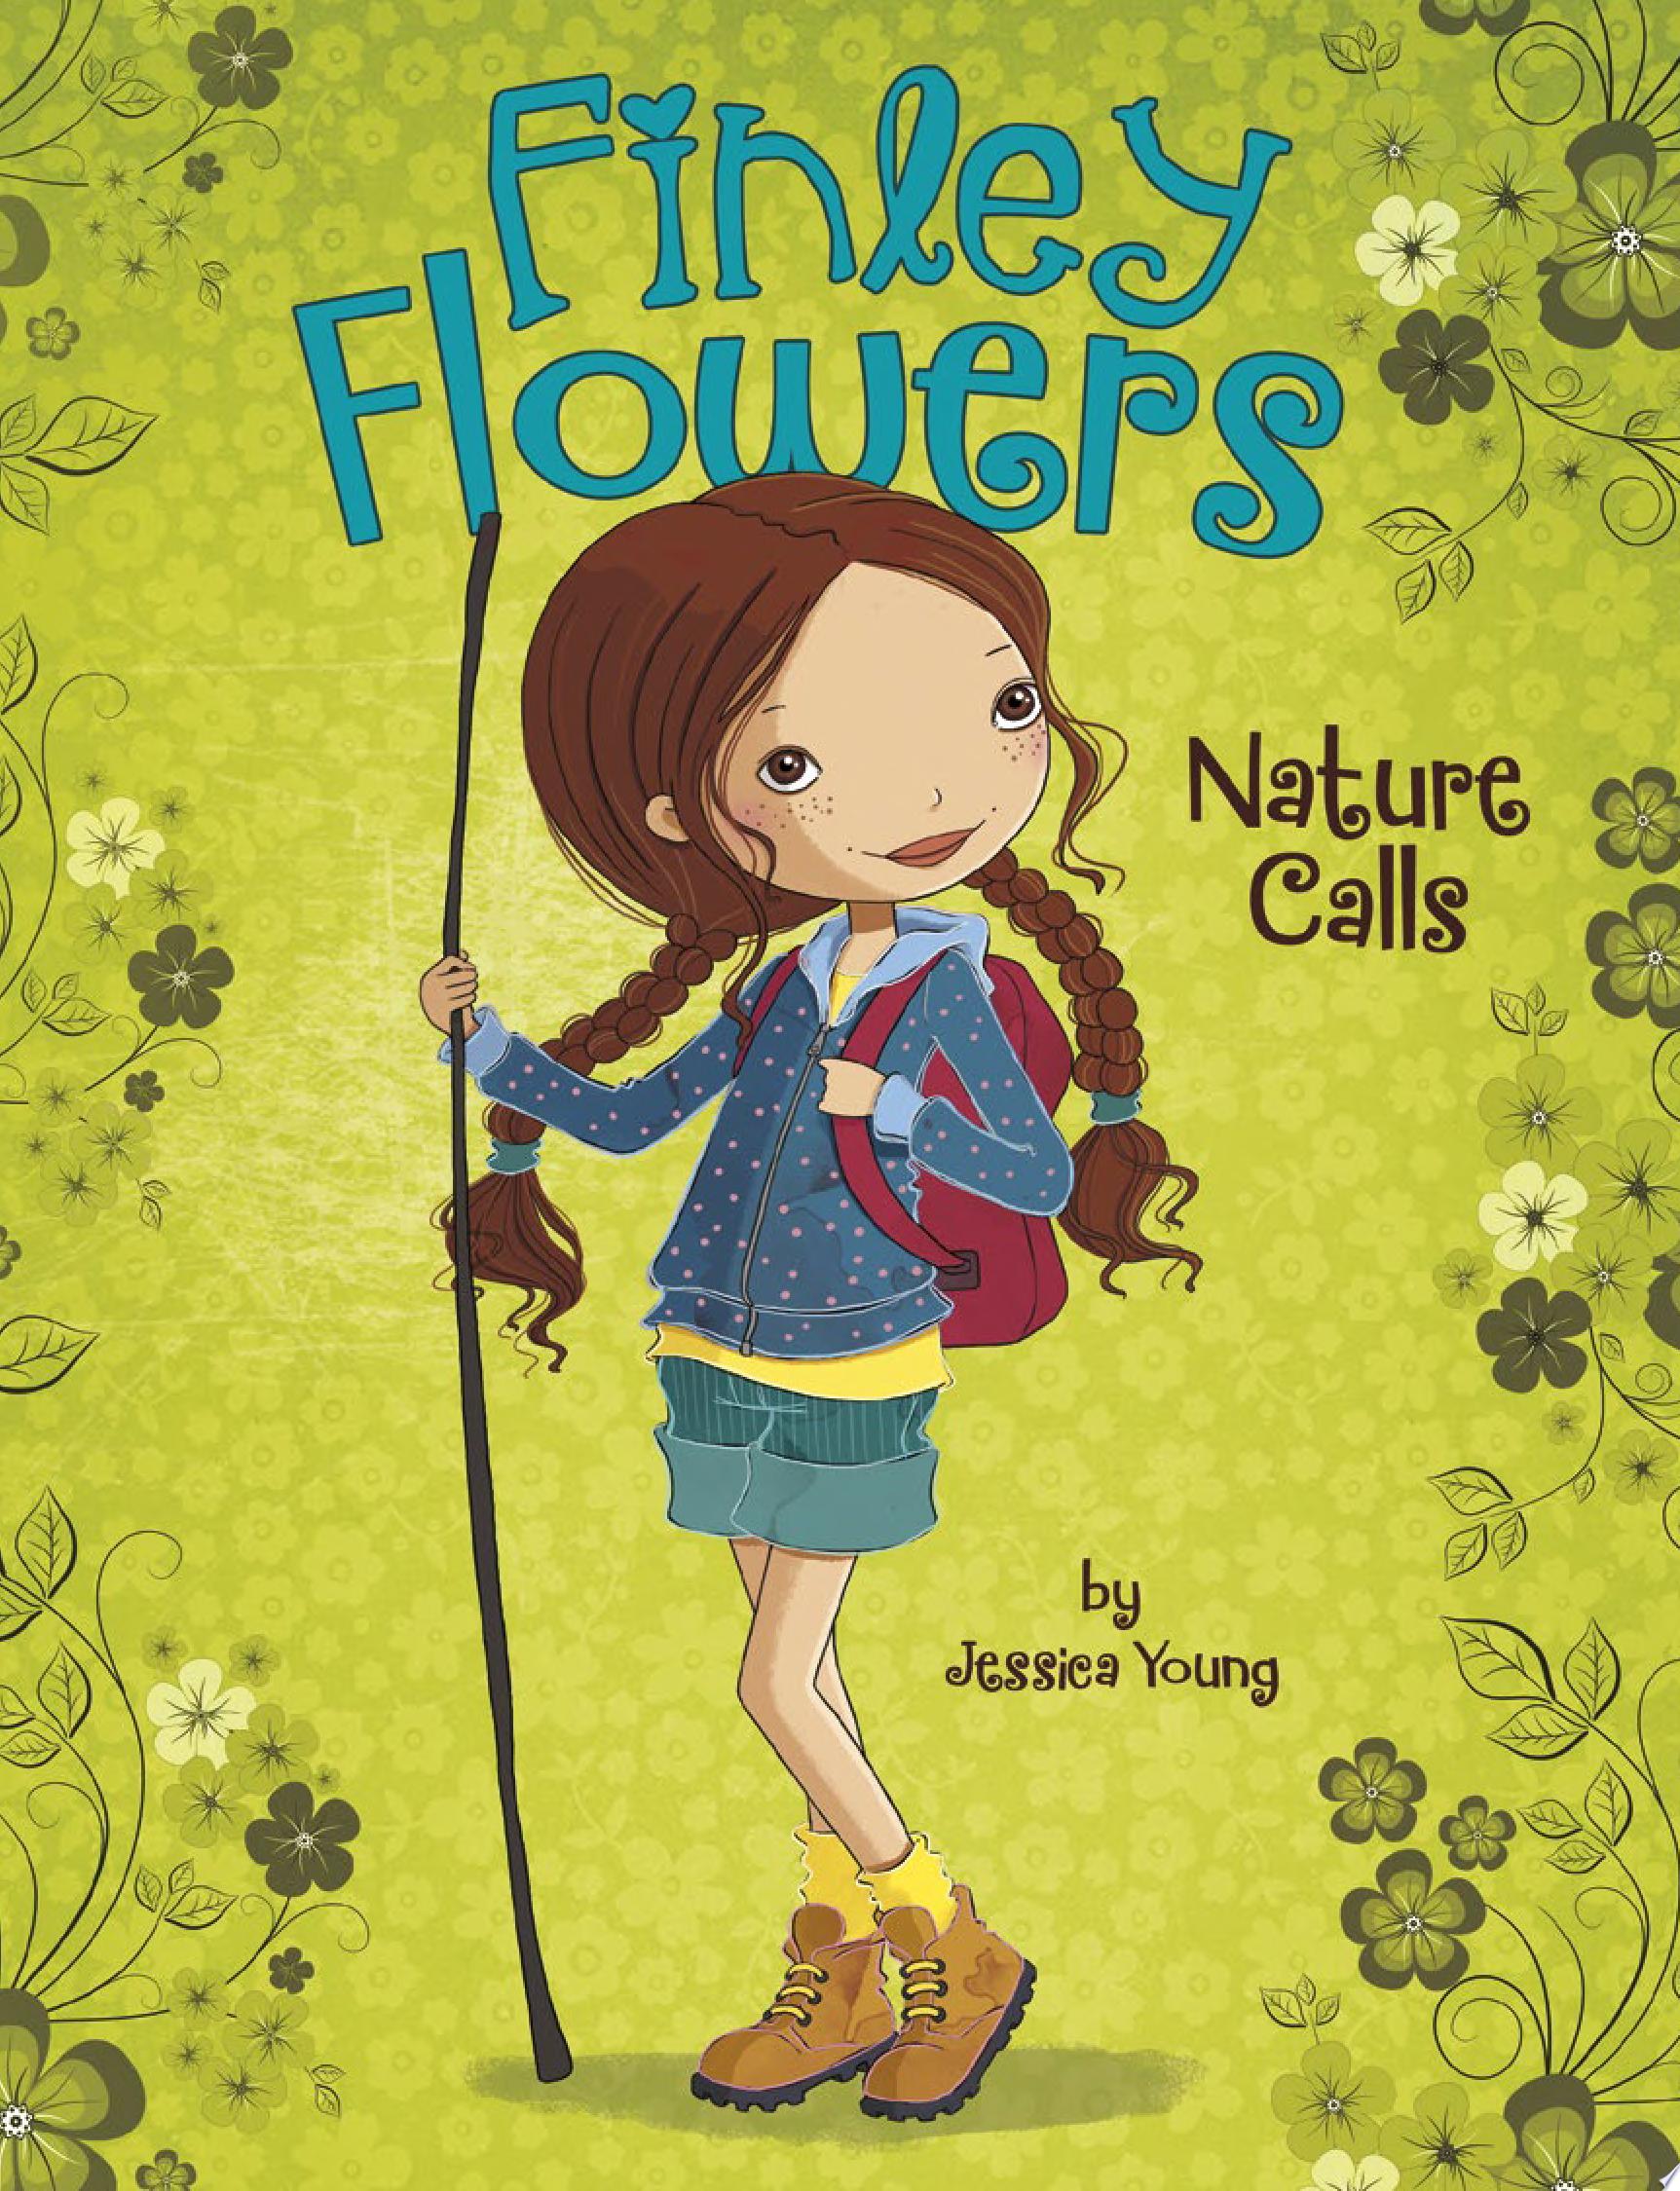 Image for "Finley Flowers: Nature Calls"